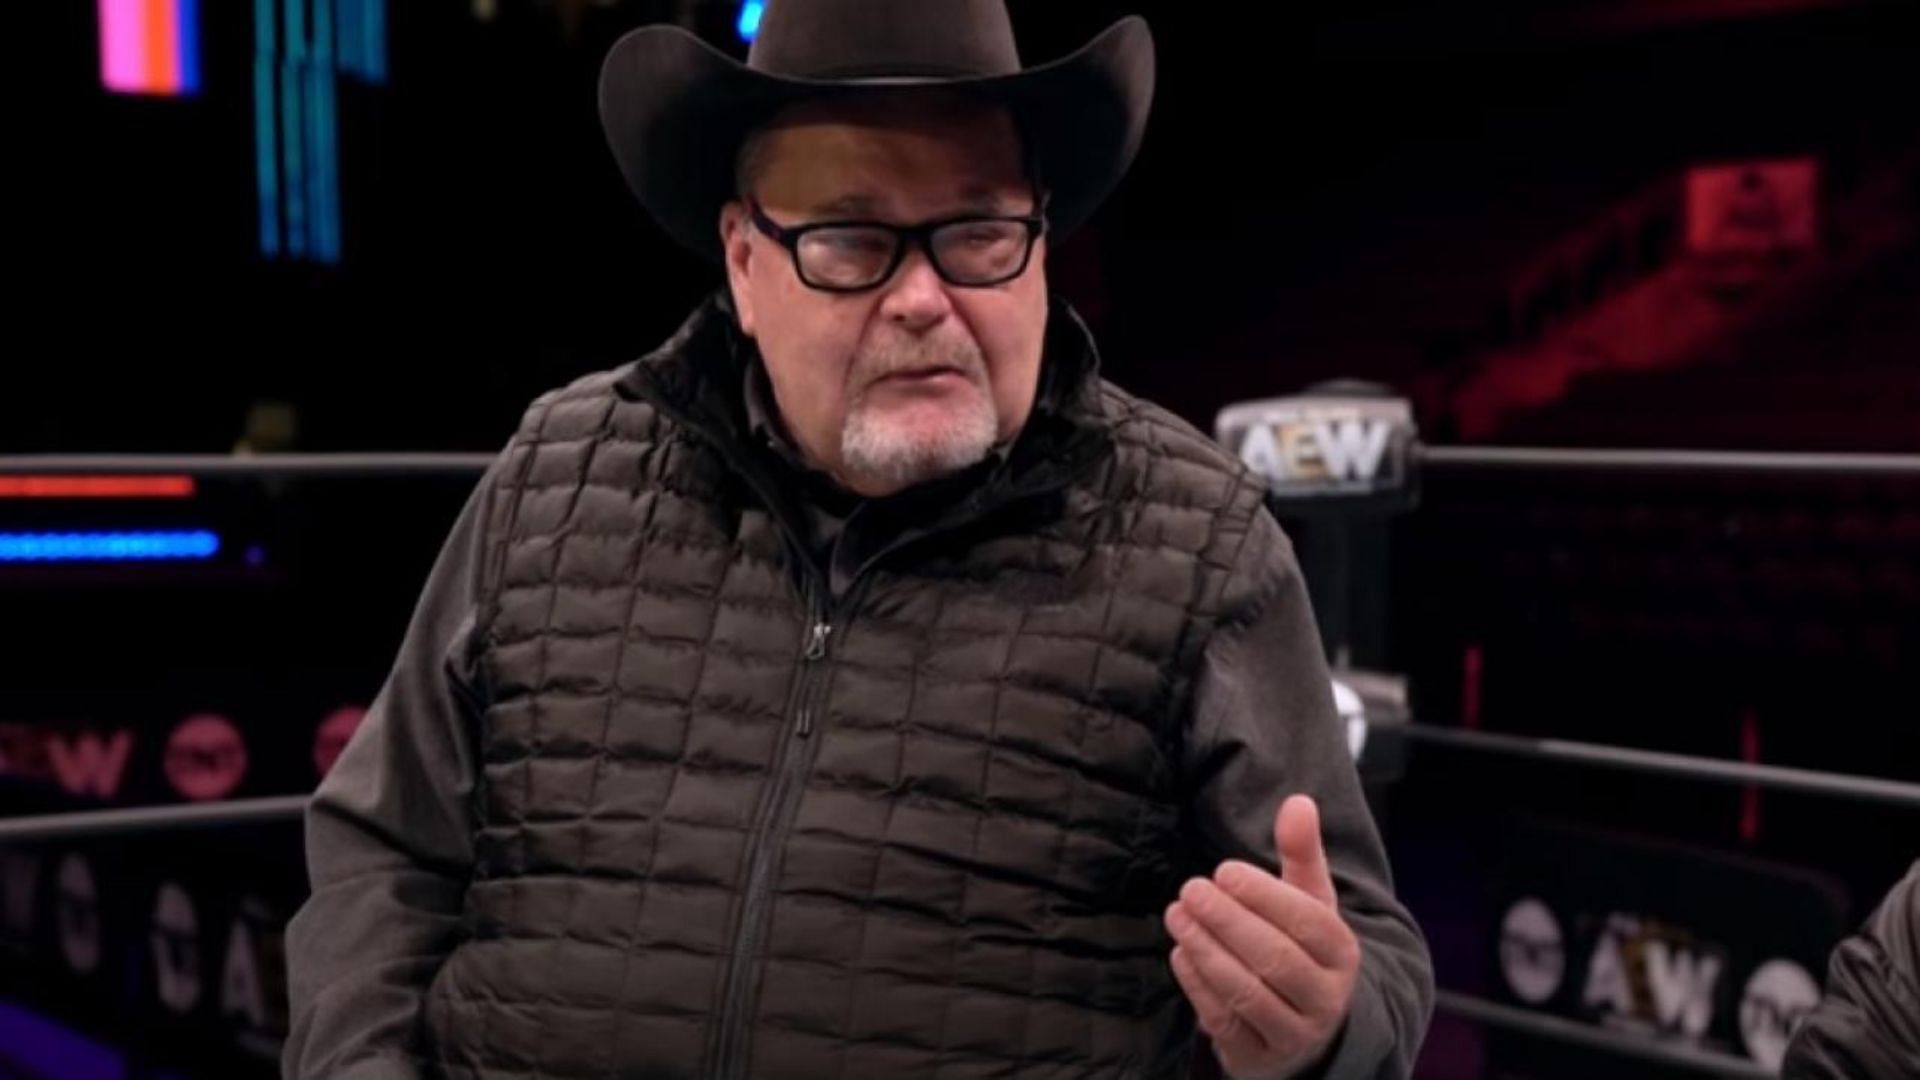 Did Jim Ross have a hand in guiding this controversial WWF tournament?